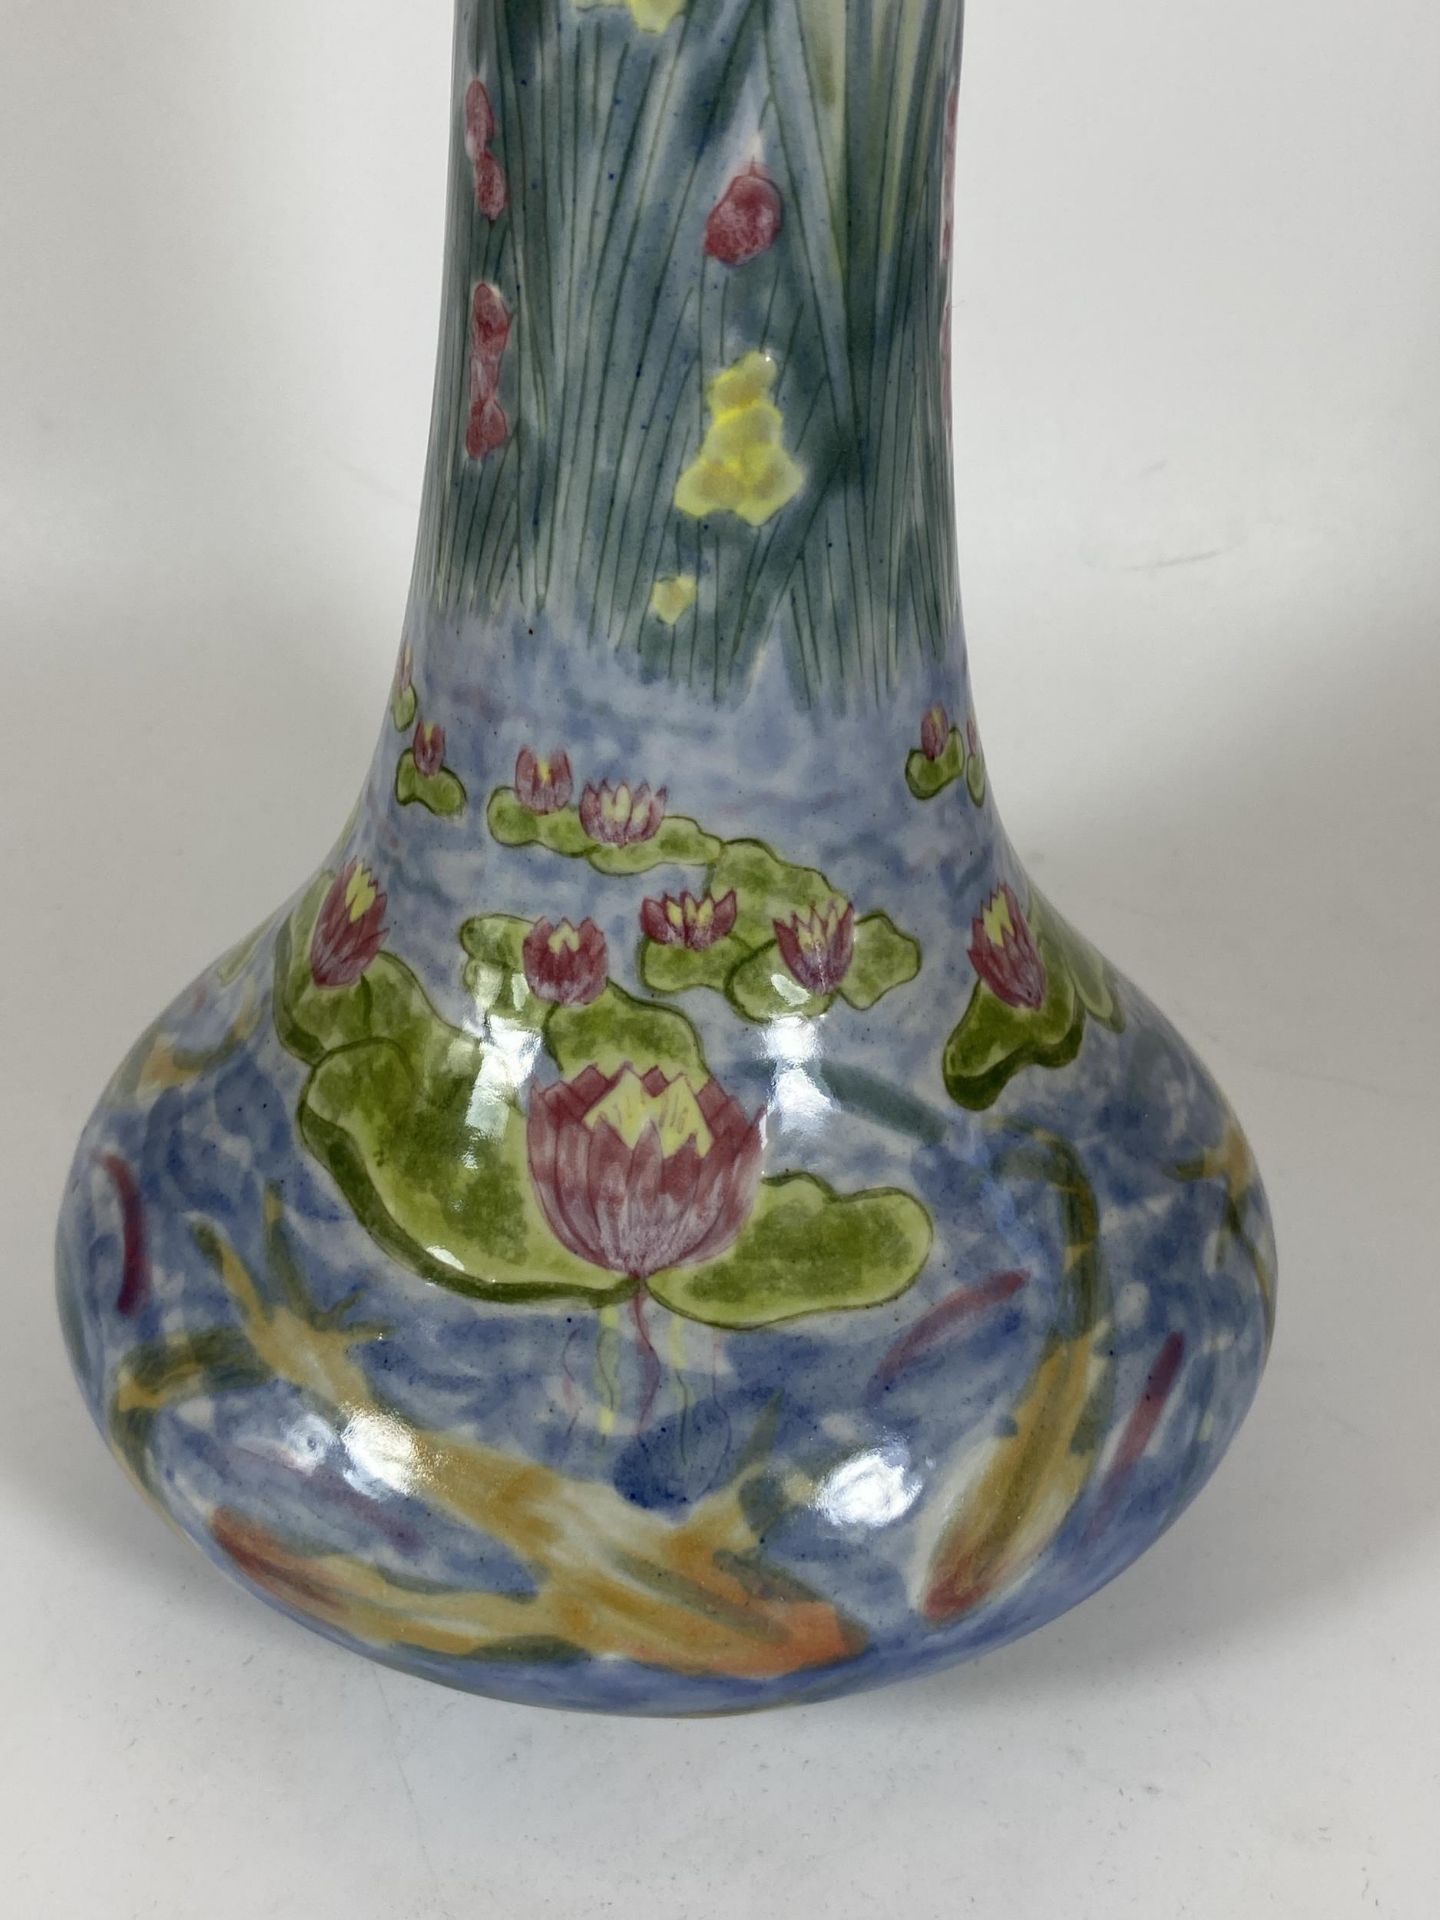 A COBRIDGE STONEWARE WATER LILY POND BULLRUSH PATTERN VASE, HEIGHT 32CM, (SECONDS) - Image 2 of 3